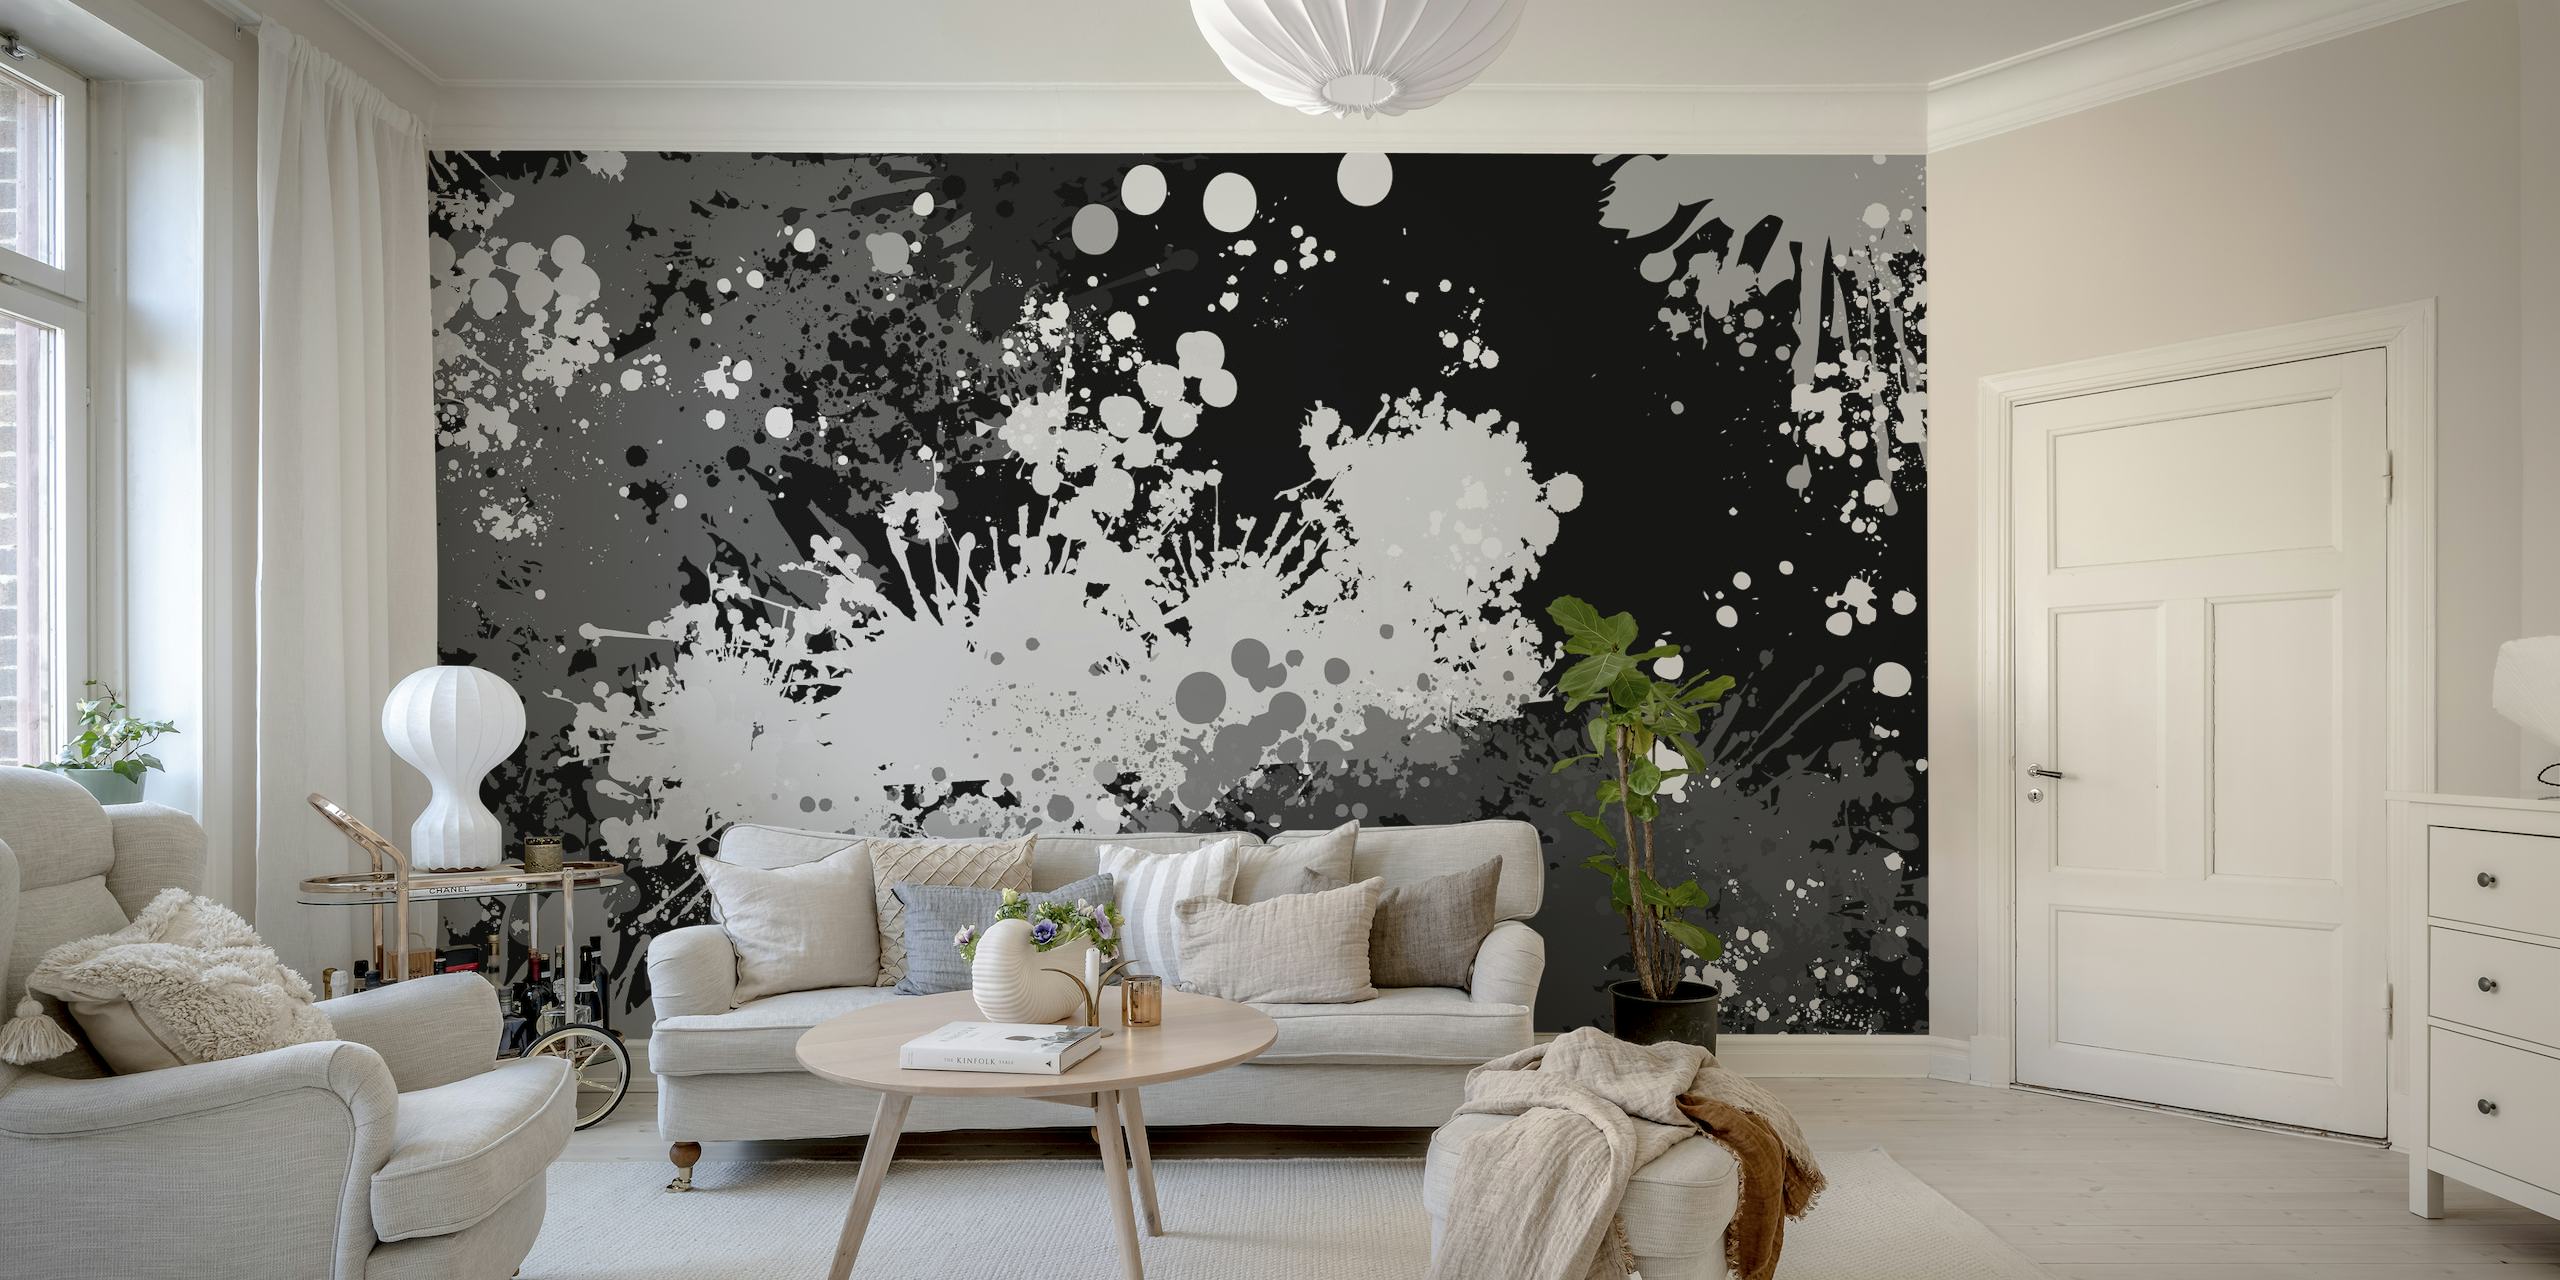 Black White and Gray modern drip painting wallpaper for home and office decor